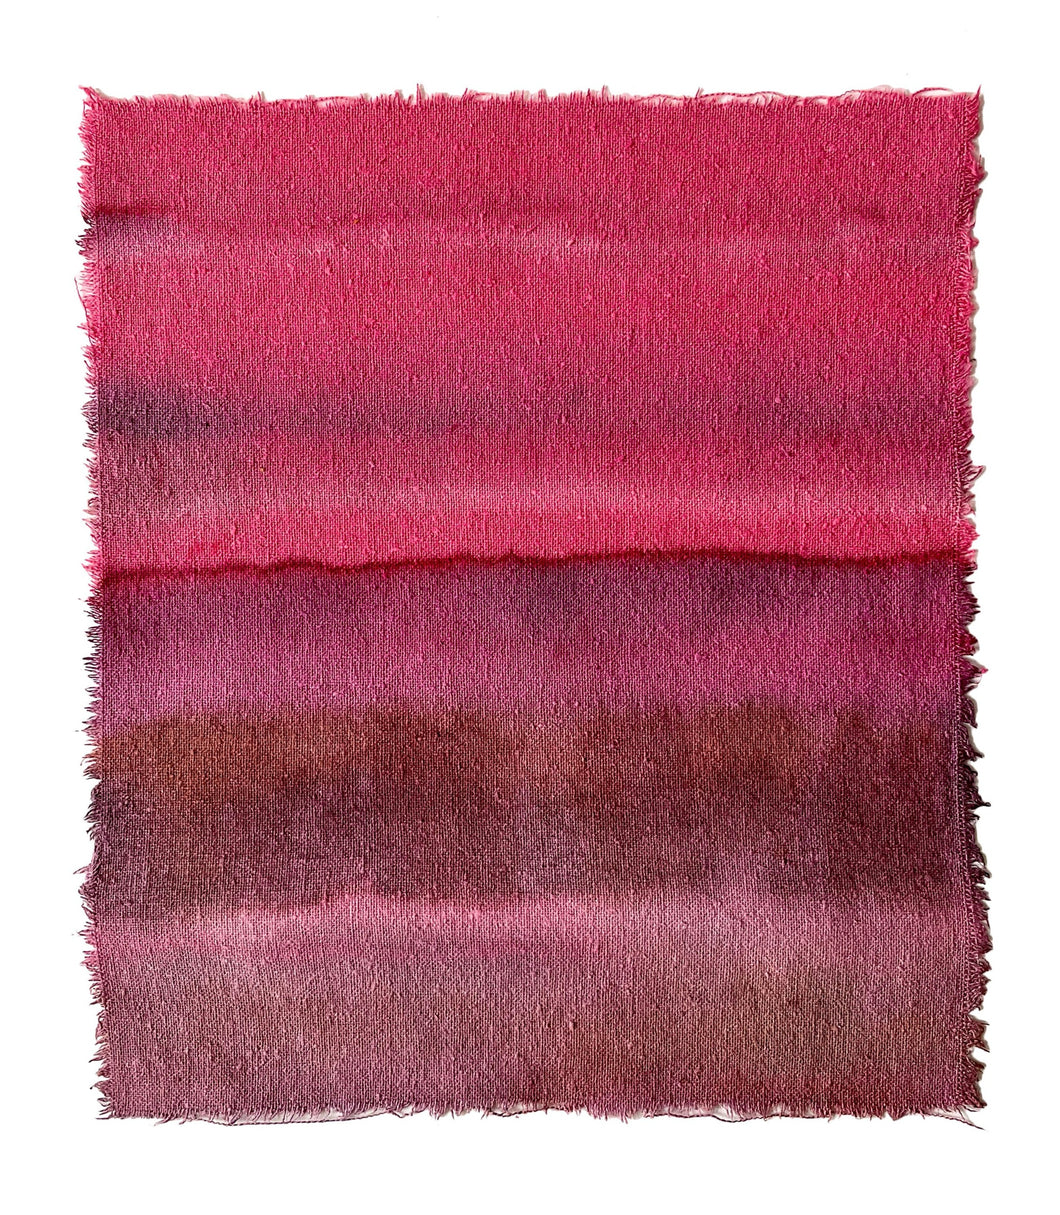 cochineal - naturally dyed textile